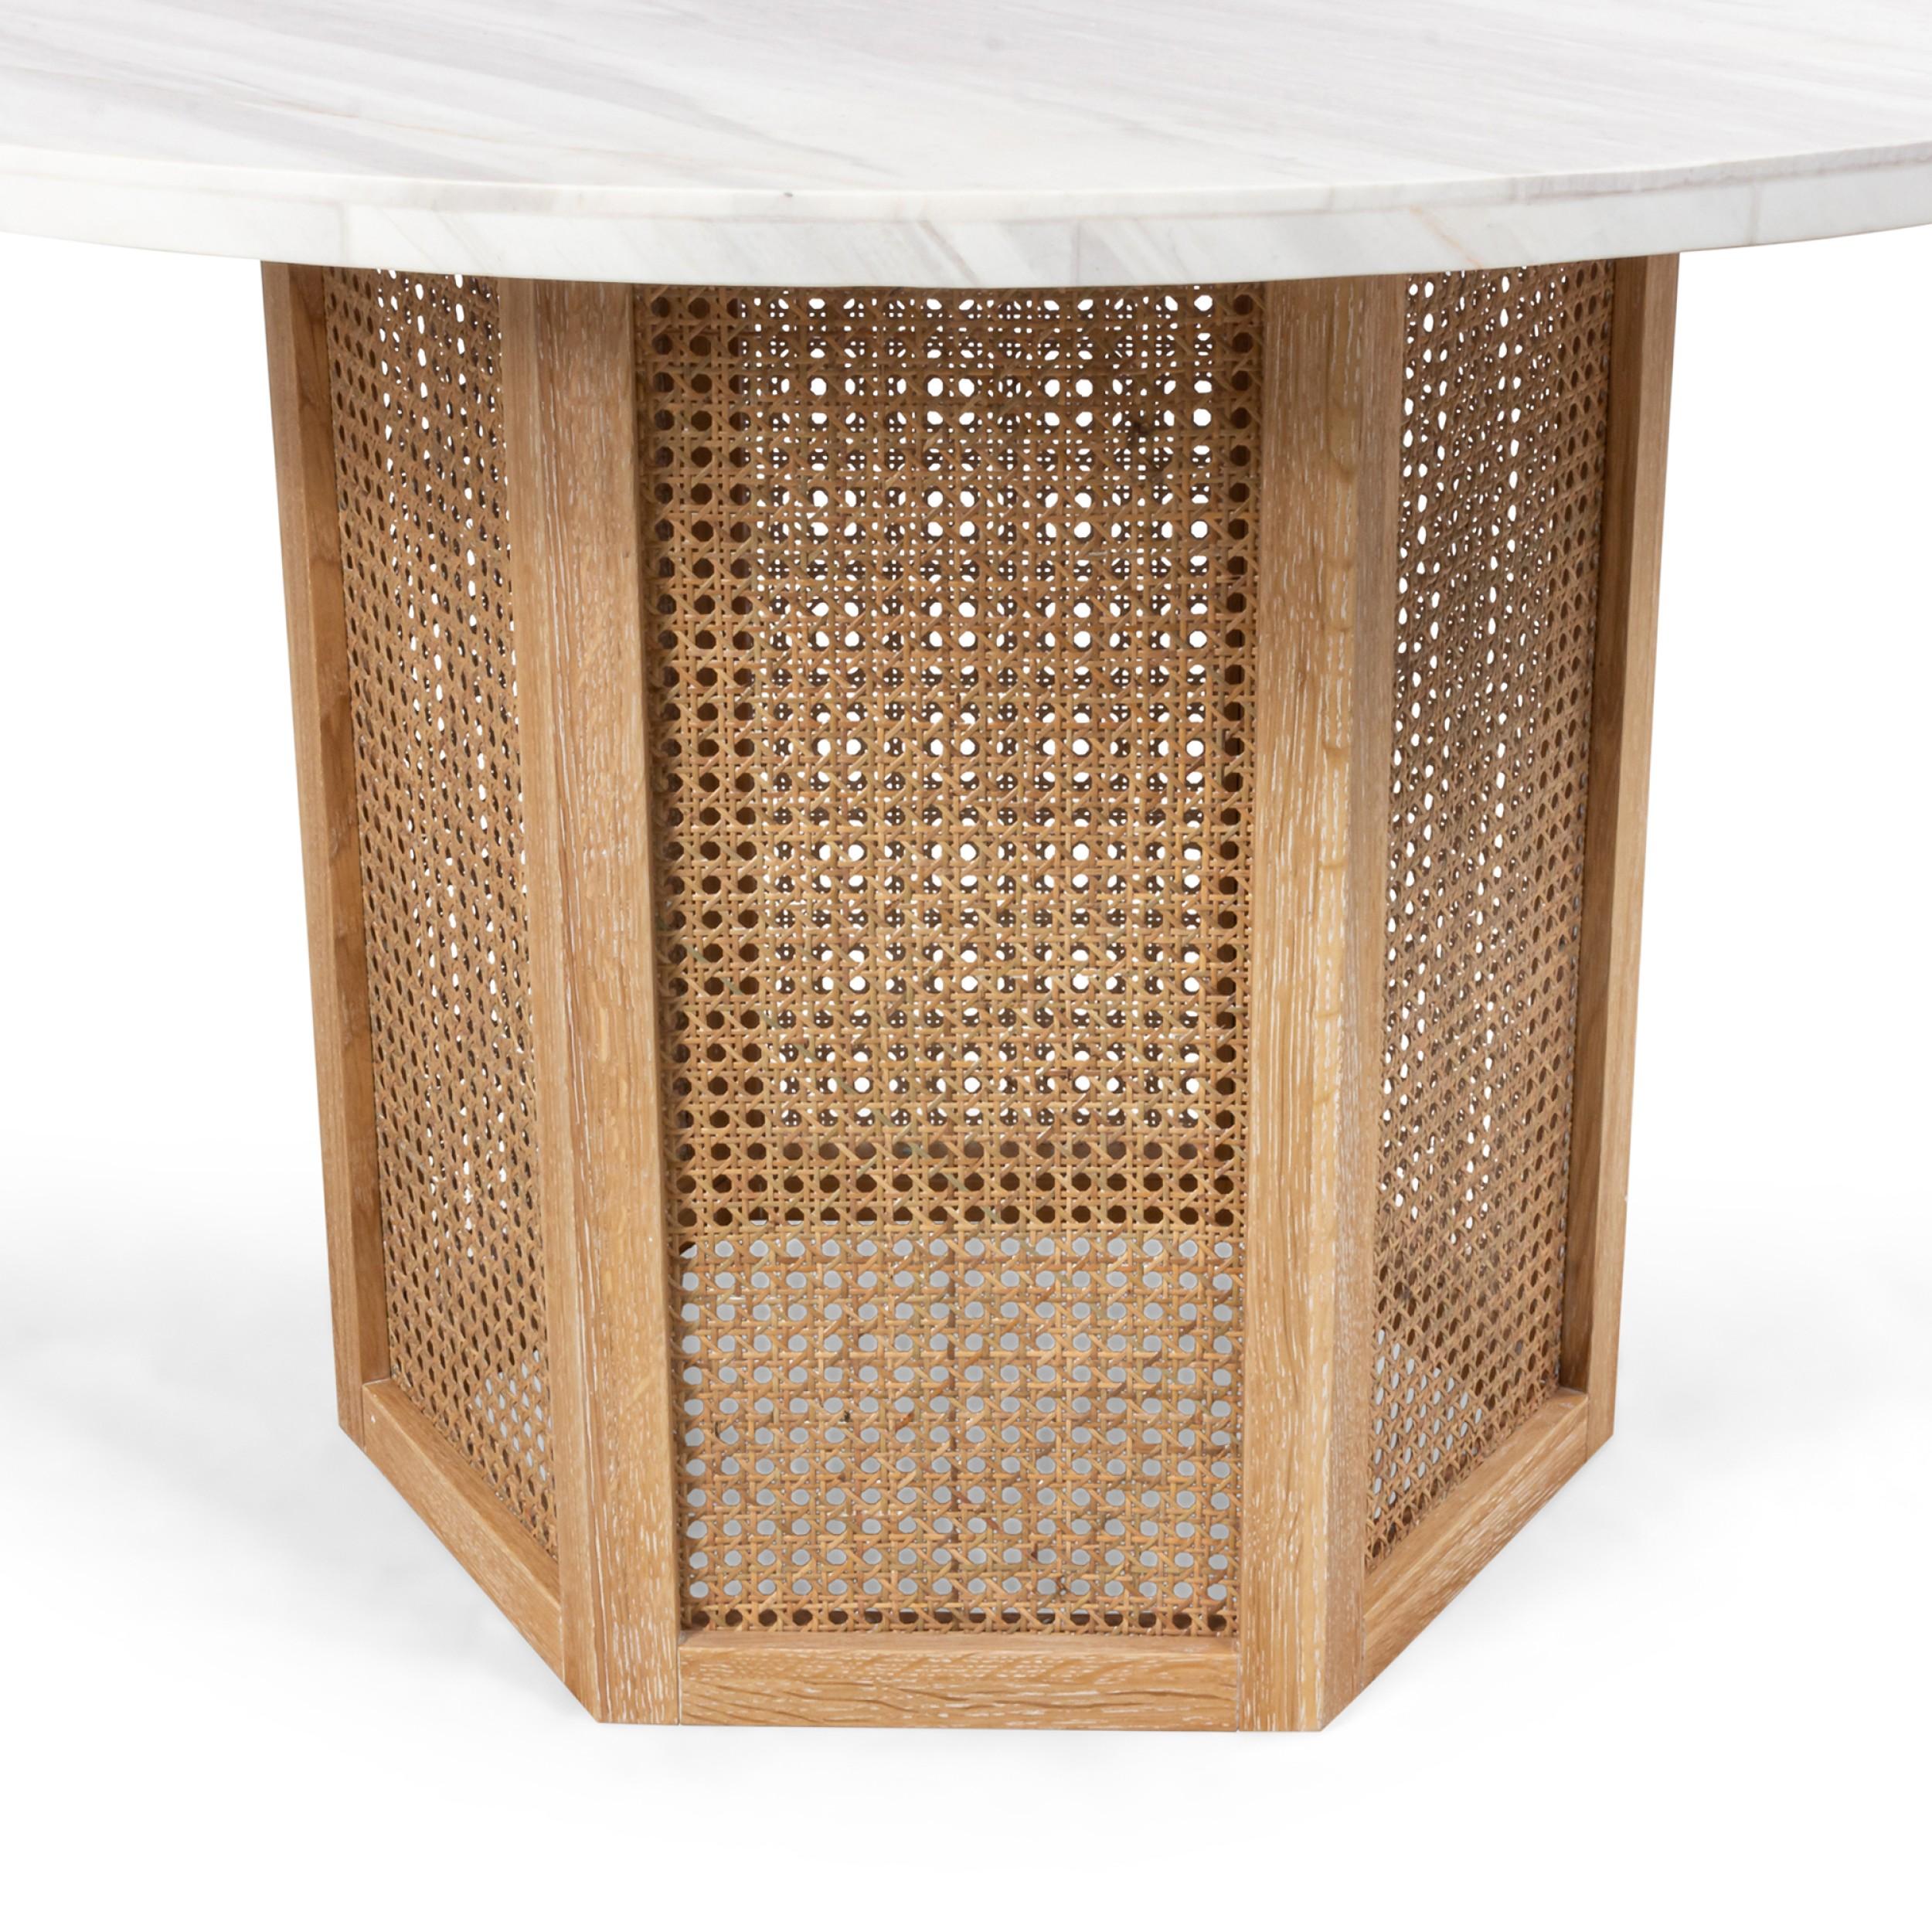 Contemporary center /dining table supported on a 6 sided cerused oak pedestal base with cane panels supporting a round white marble veneer top
